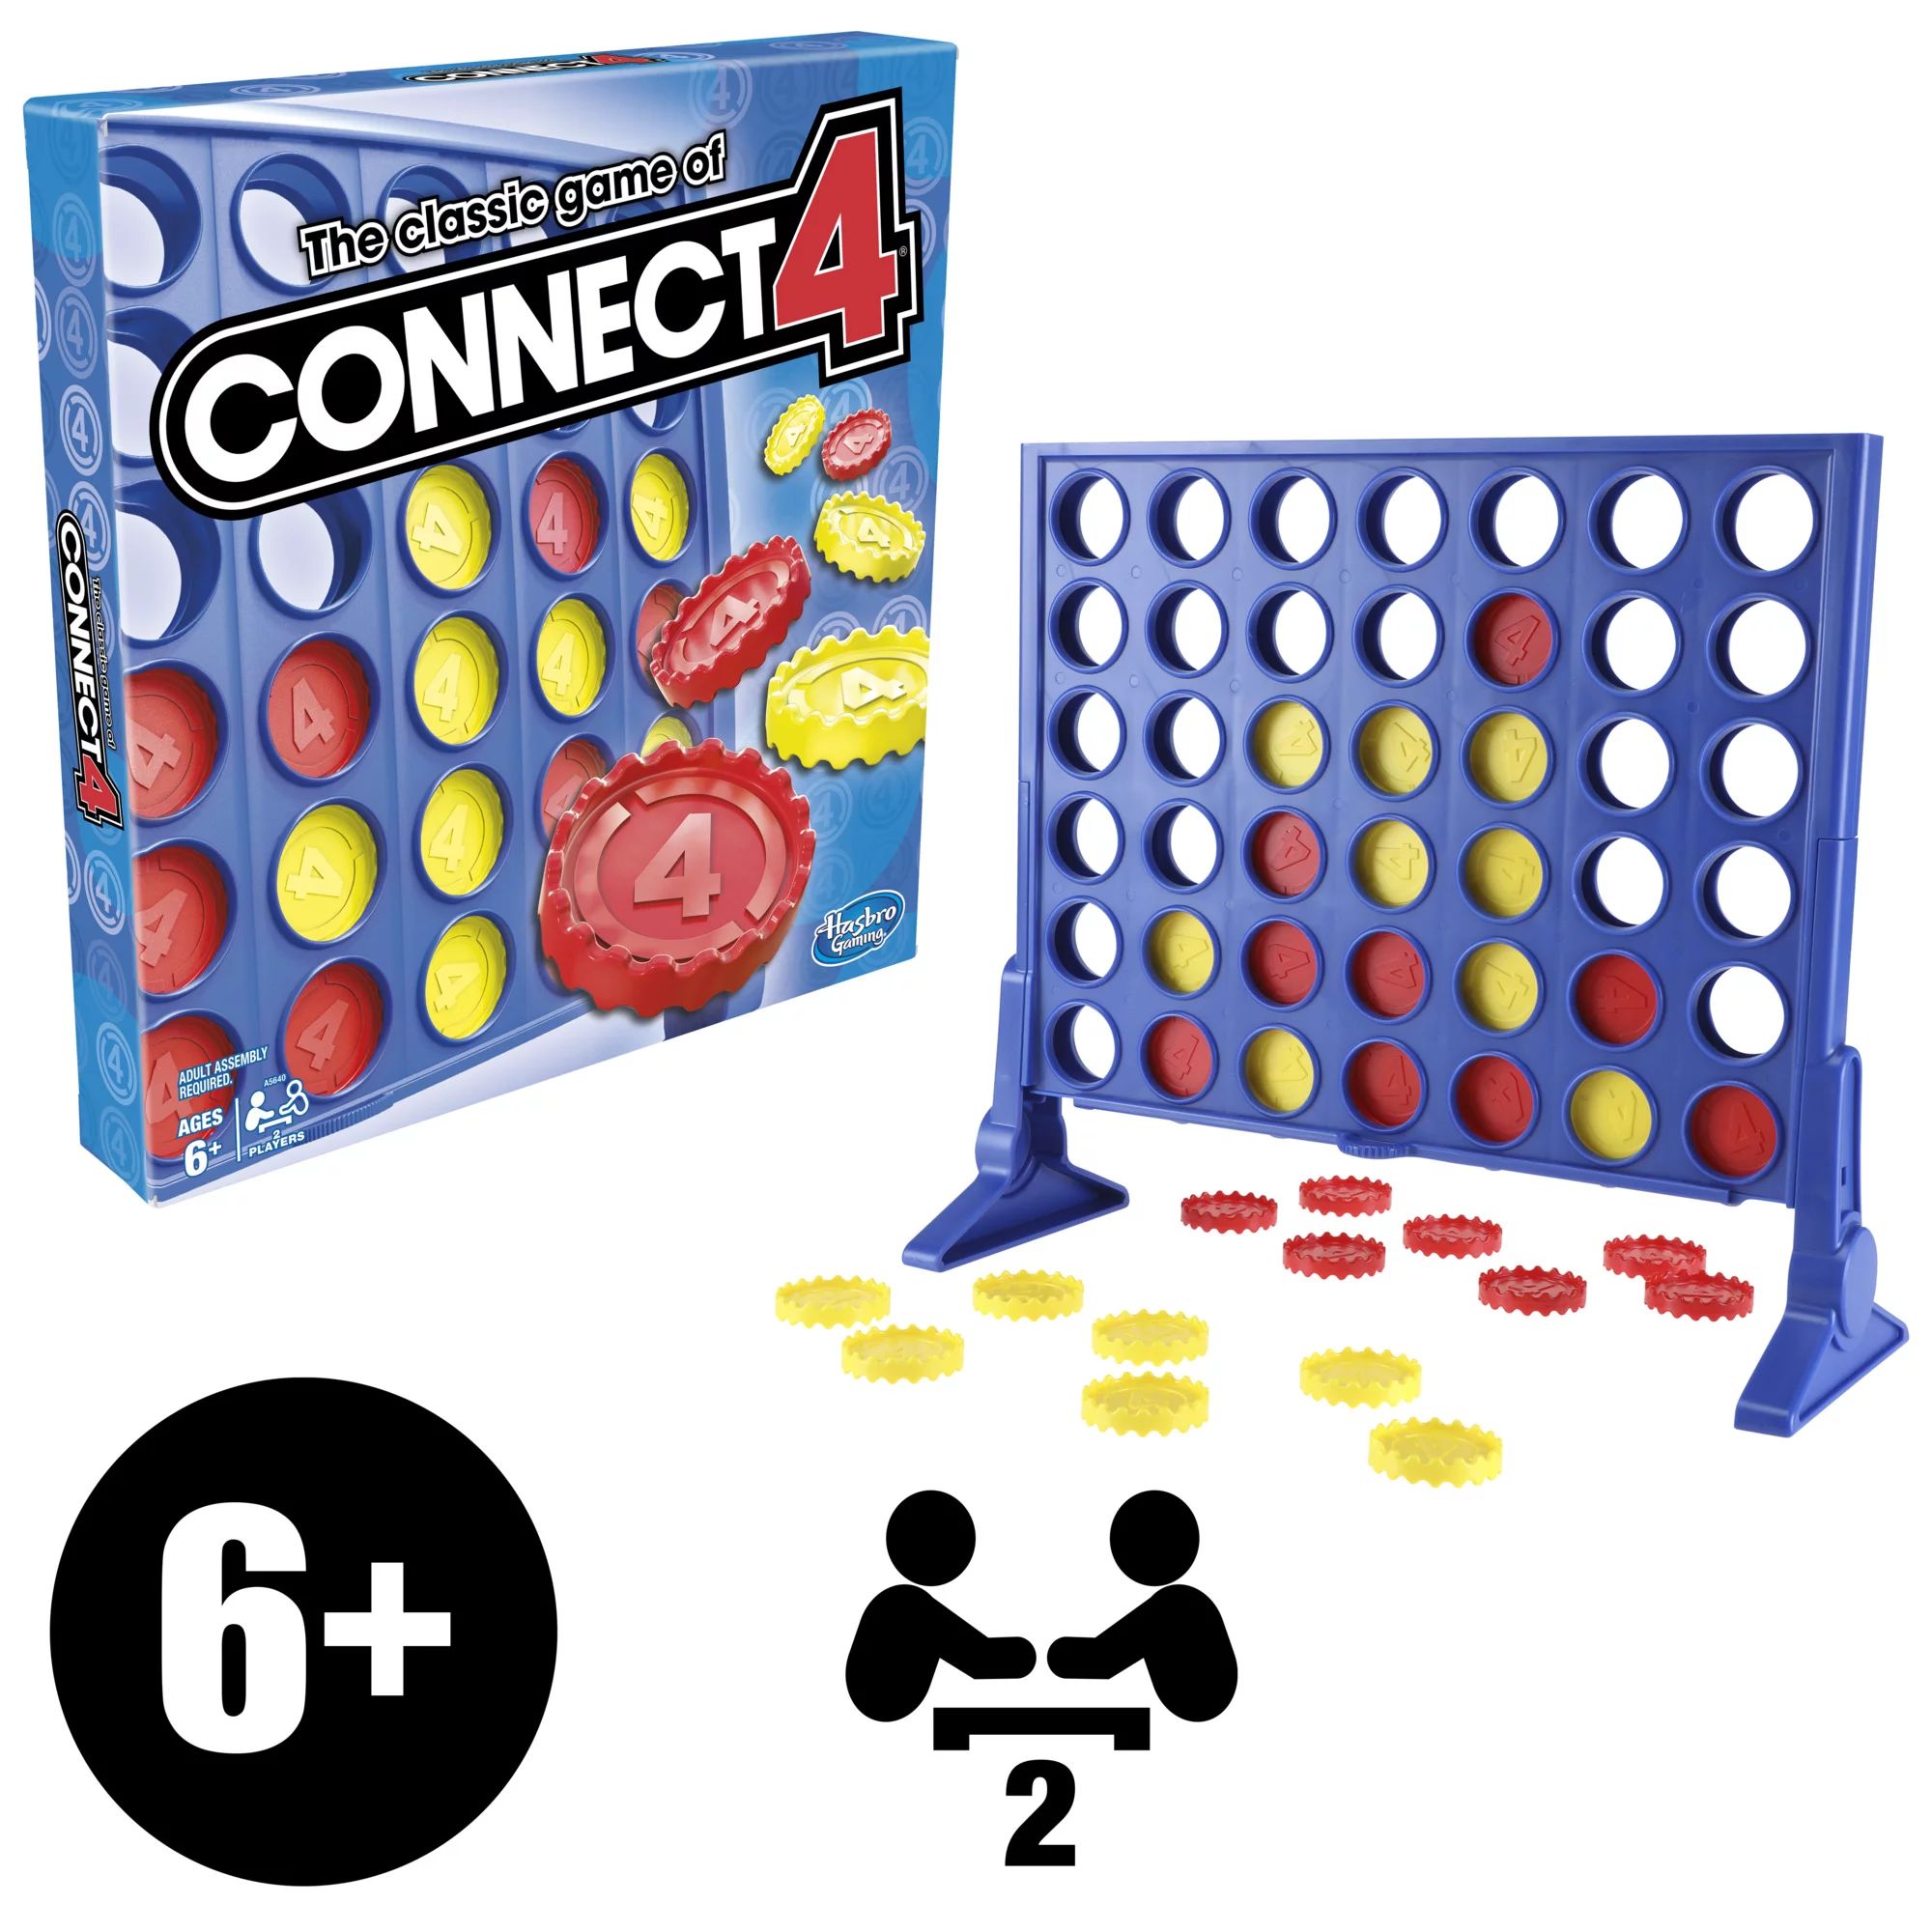 Connect 4 Classic Grid Board Game, 4 in a Row Game for Kids, 2 Player Strategy Board Games, Ages ... | Walmart (US)